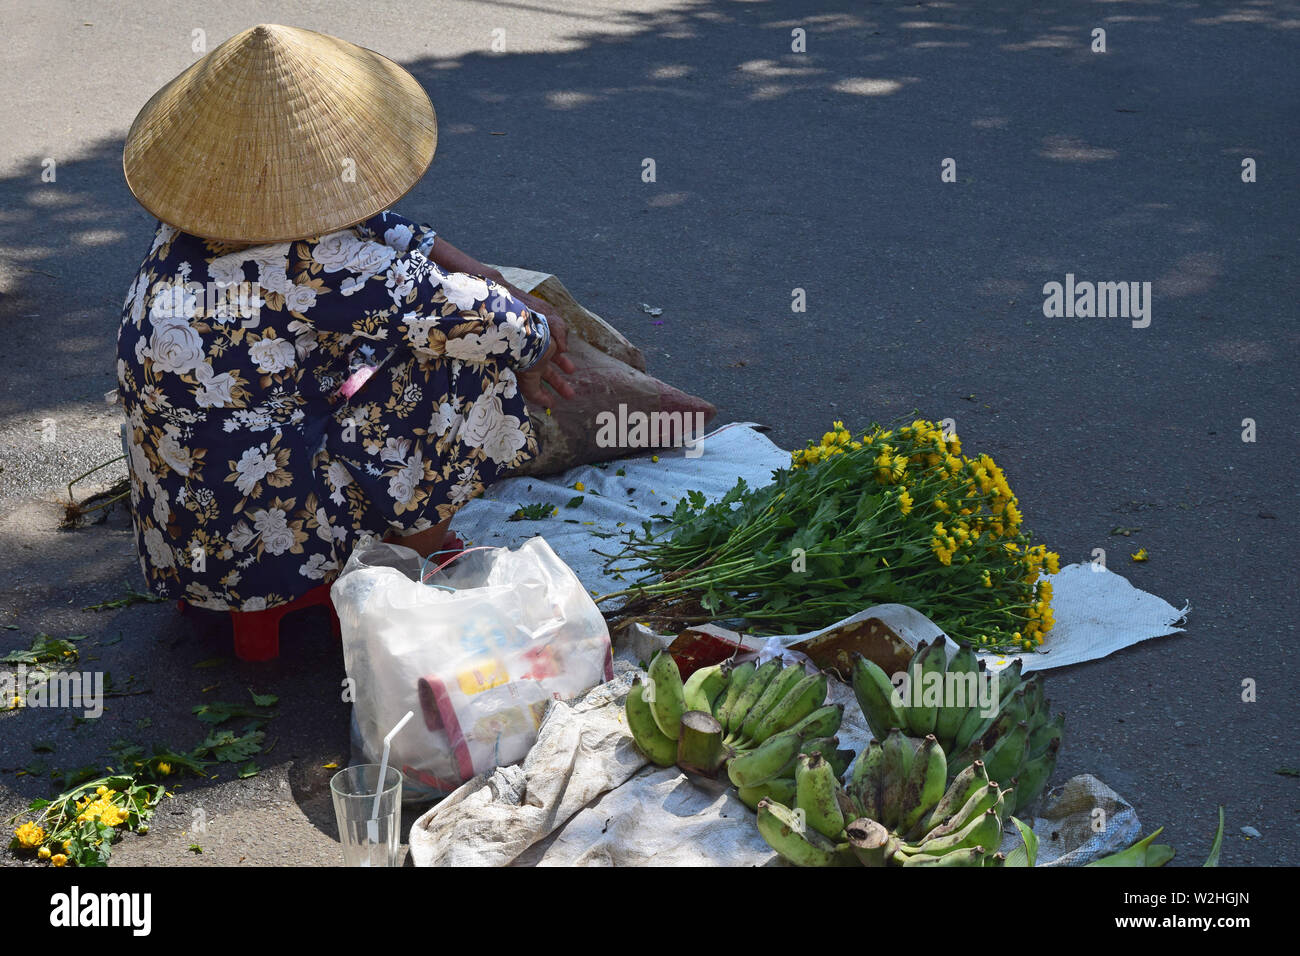 Hanoi, Vietnam, April 3, 2019: A vietnamese woman seated on the road sells yellow flowers. Woman Vendor of flowers on the street of Ha Noi, Vietnam. Stock Photo